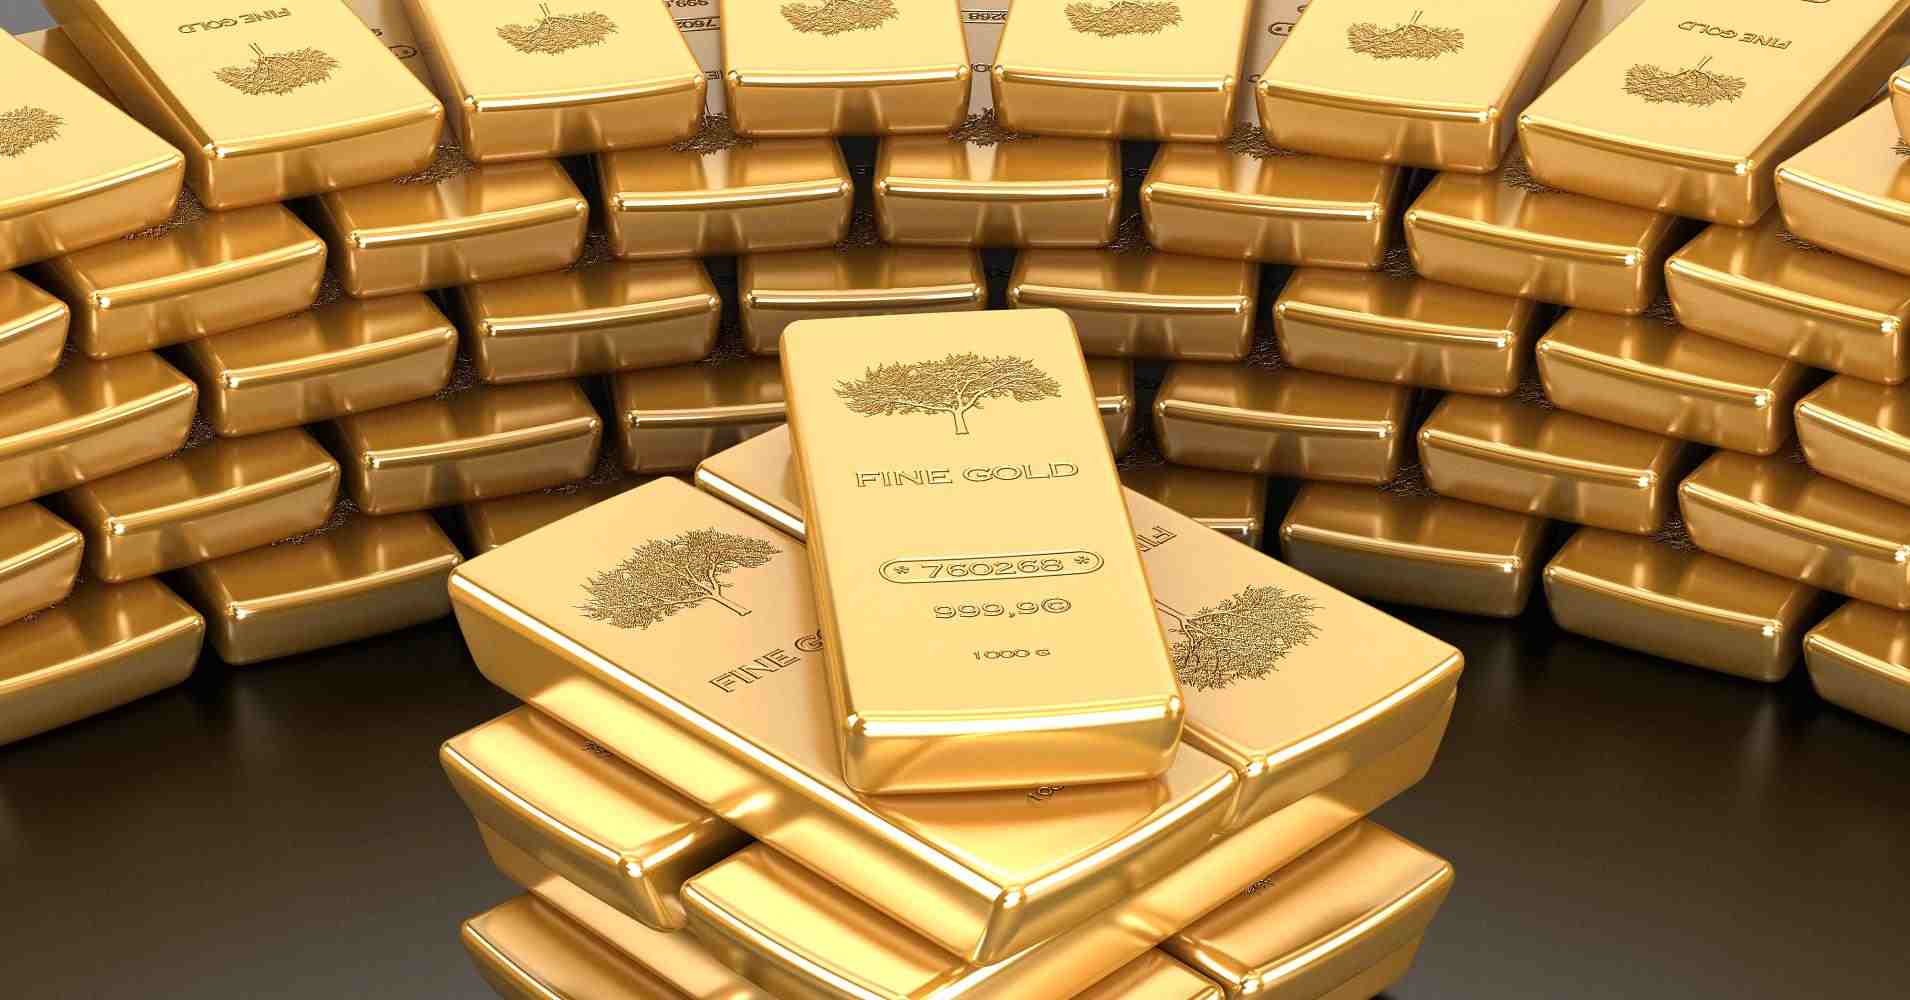 Iraq is the largest purchaser of gold in the second quarter of 2022